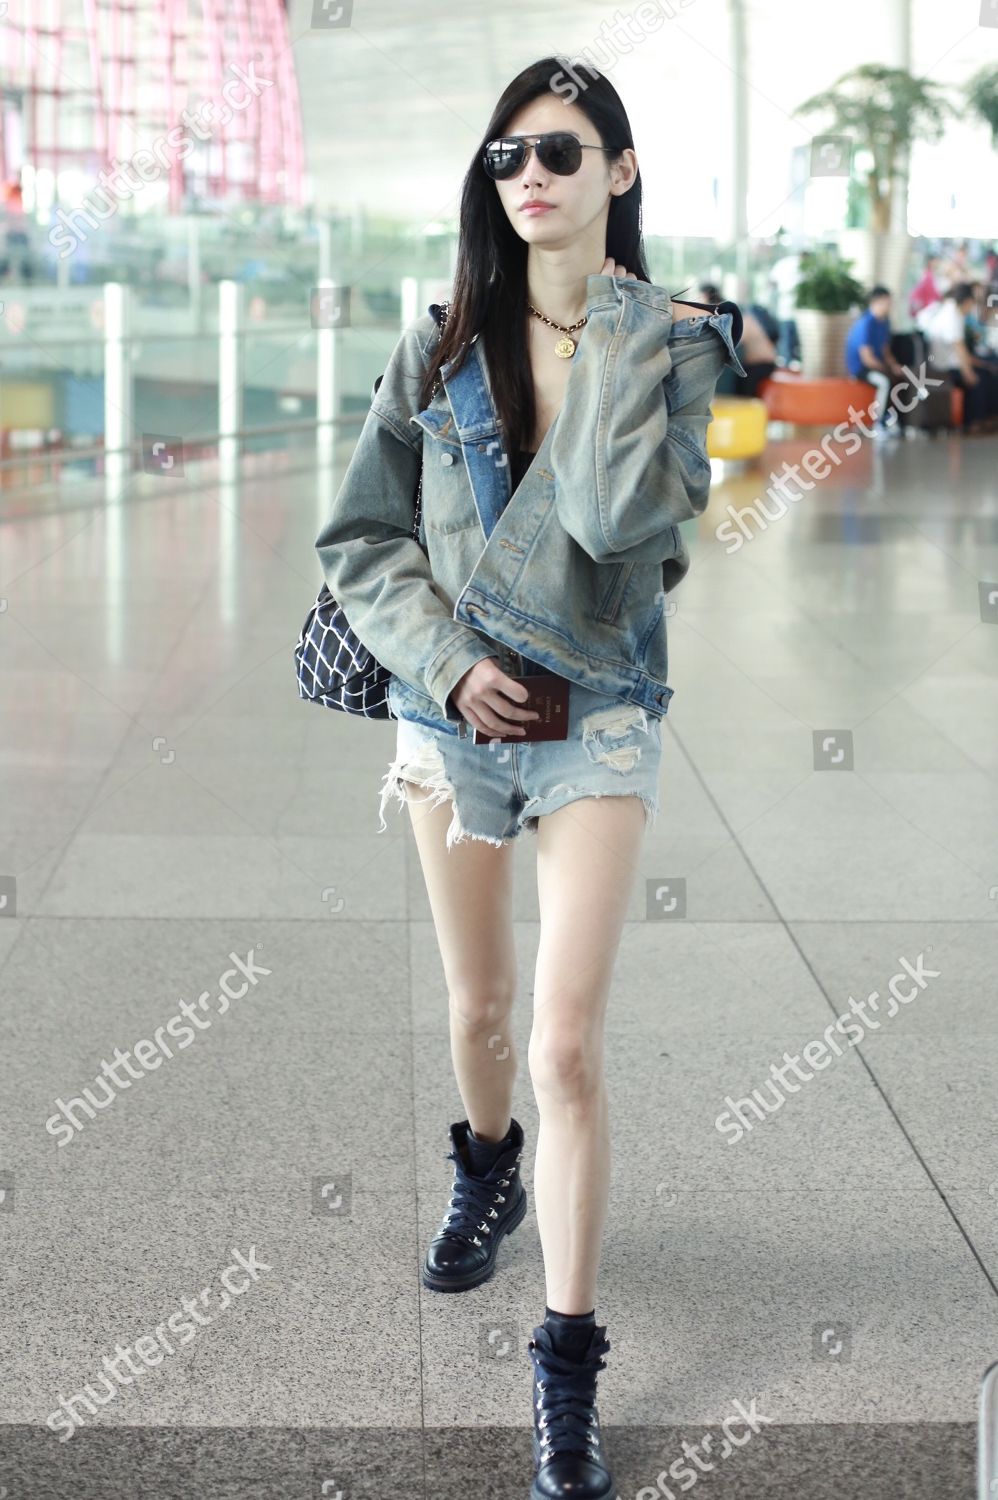 Xi Mengyao Known Ming Xi Editorial Stock Photo - Stock Image  image